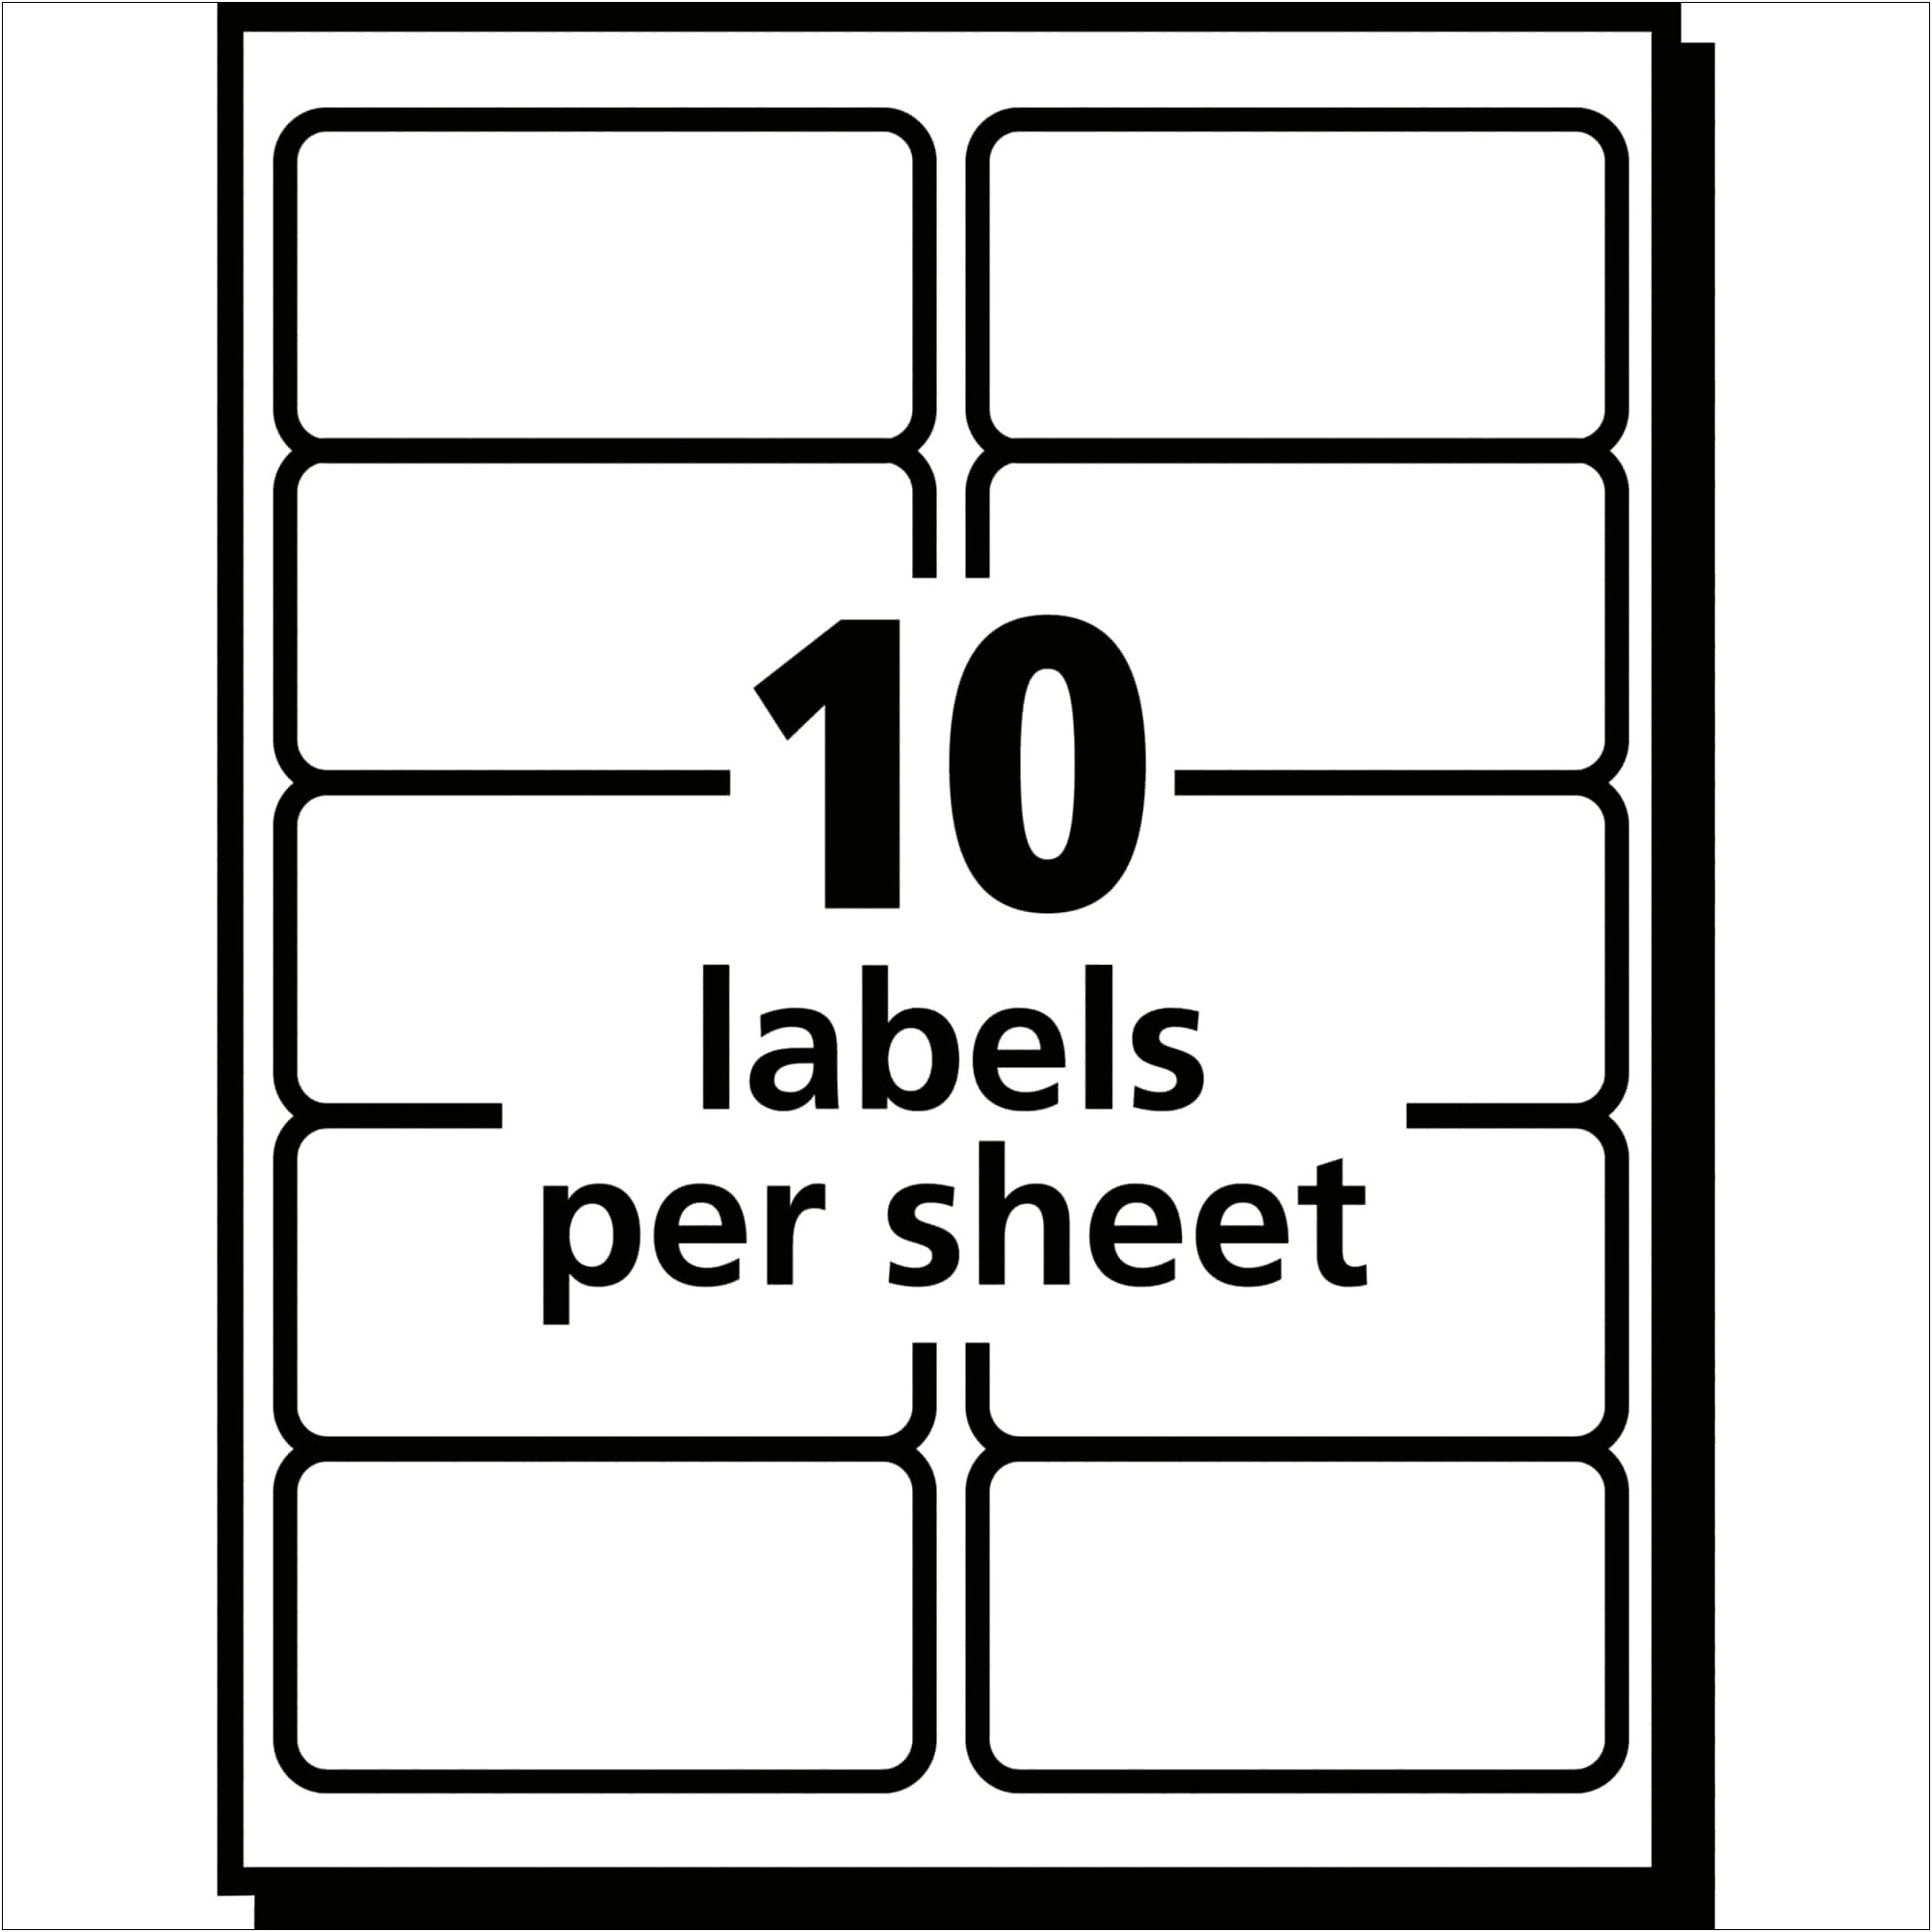 Free Template For 2 X 4 Label